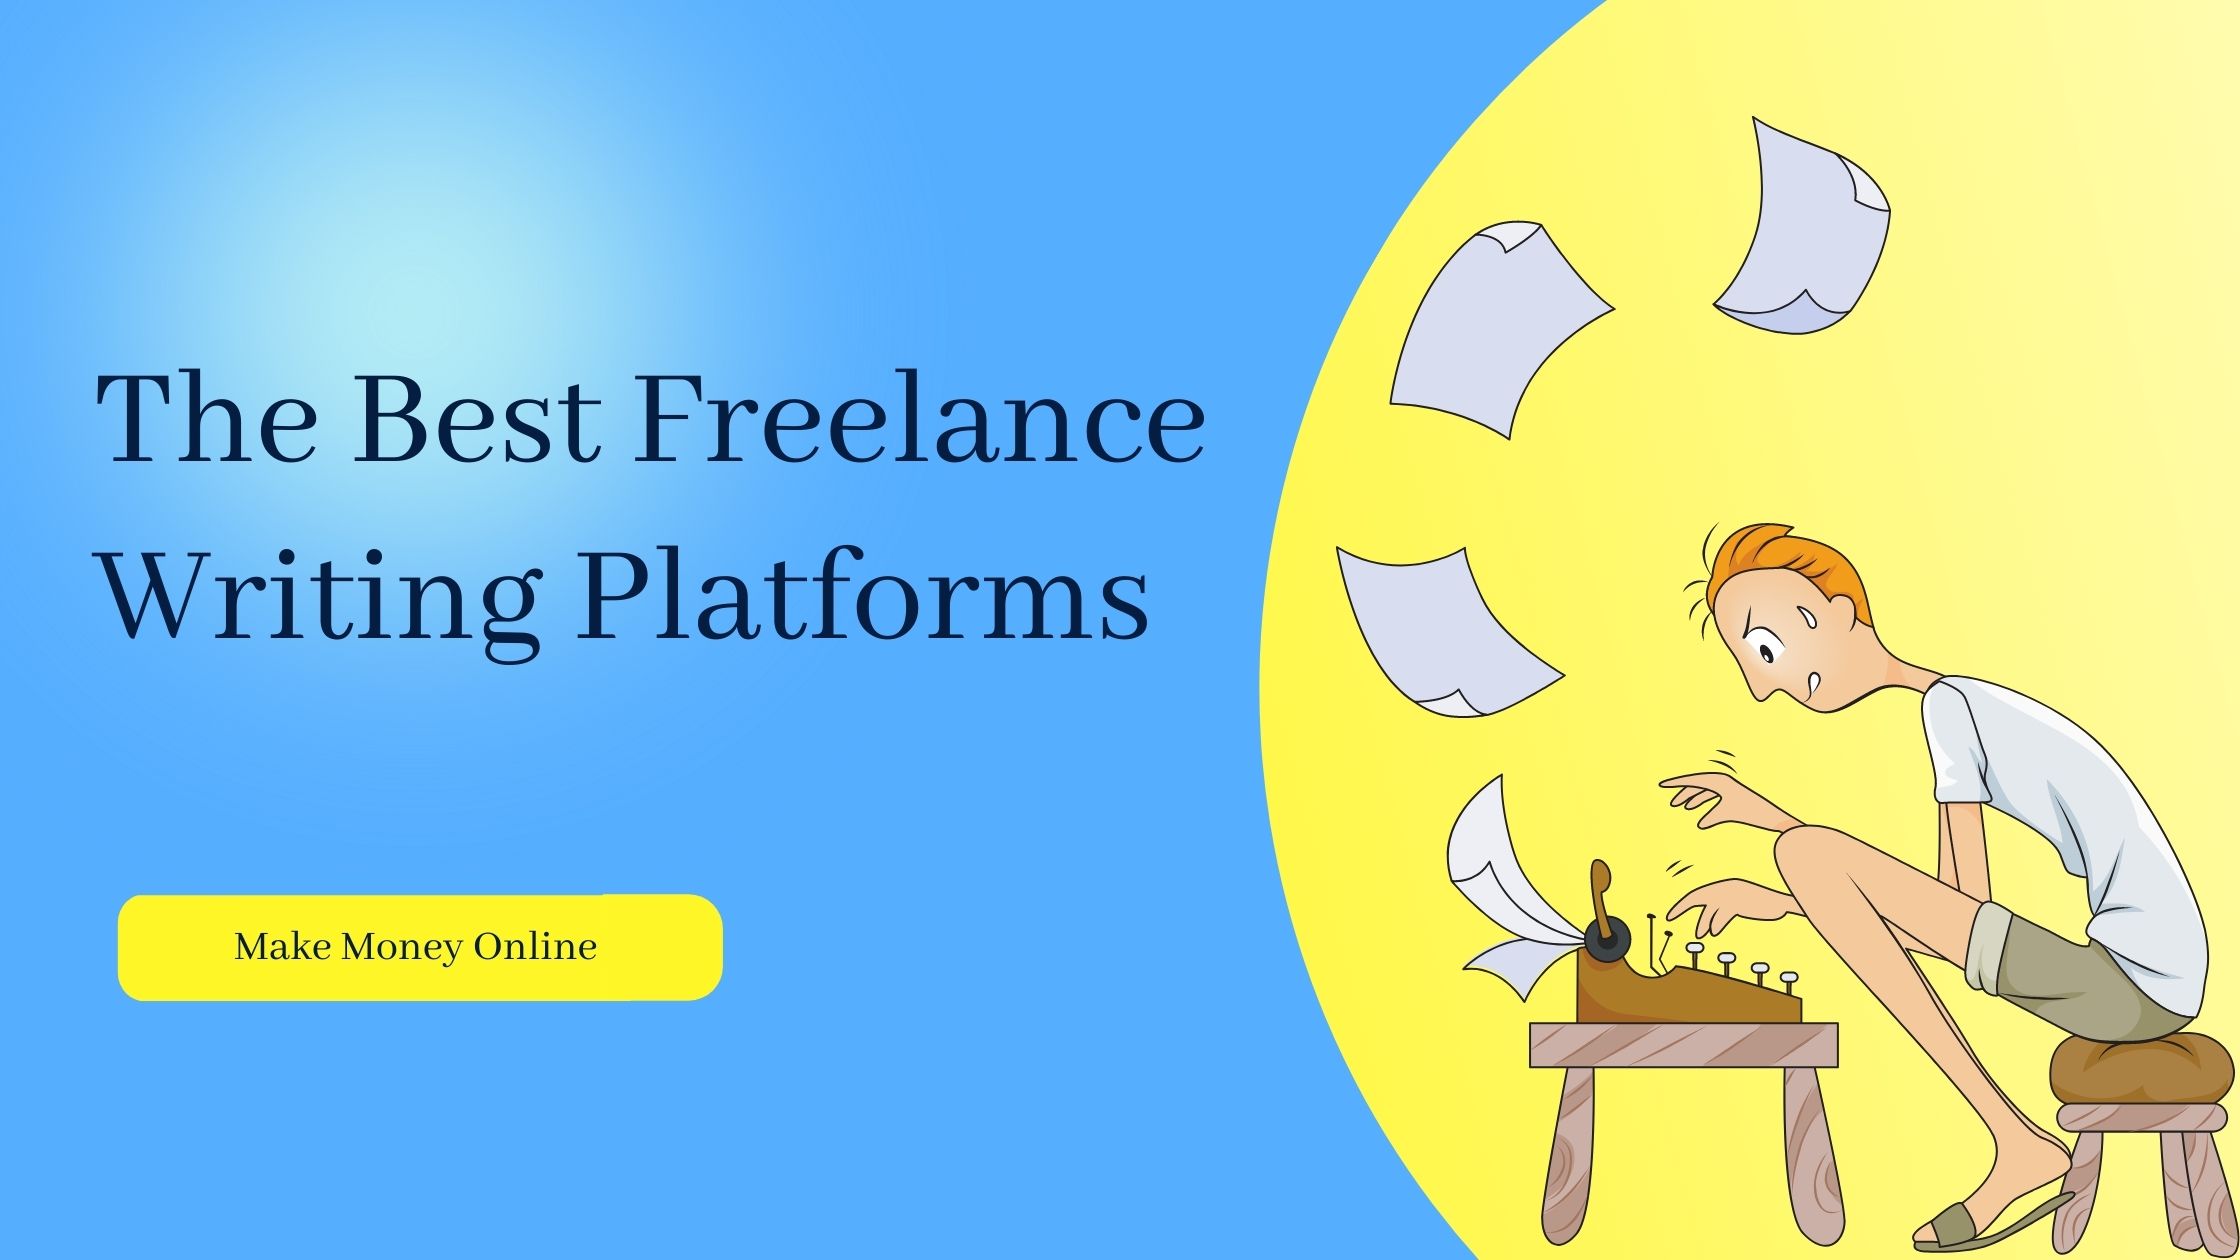 We've compiled a list of the best freelance writing platforms out there, and how to get started.